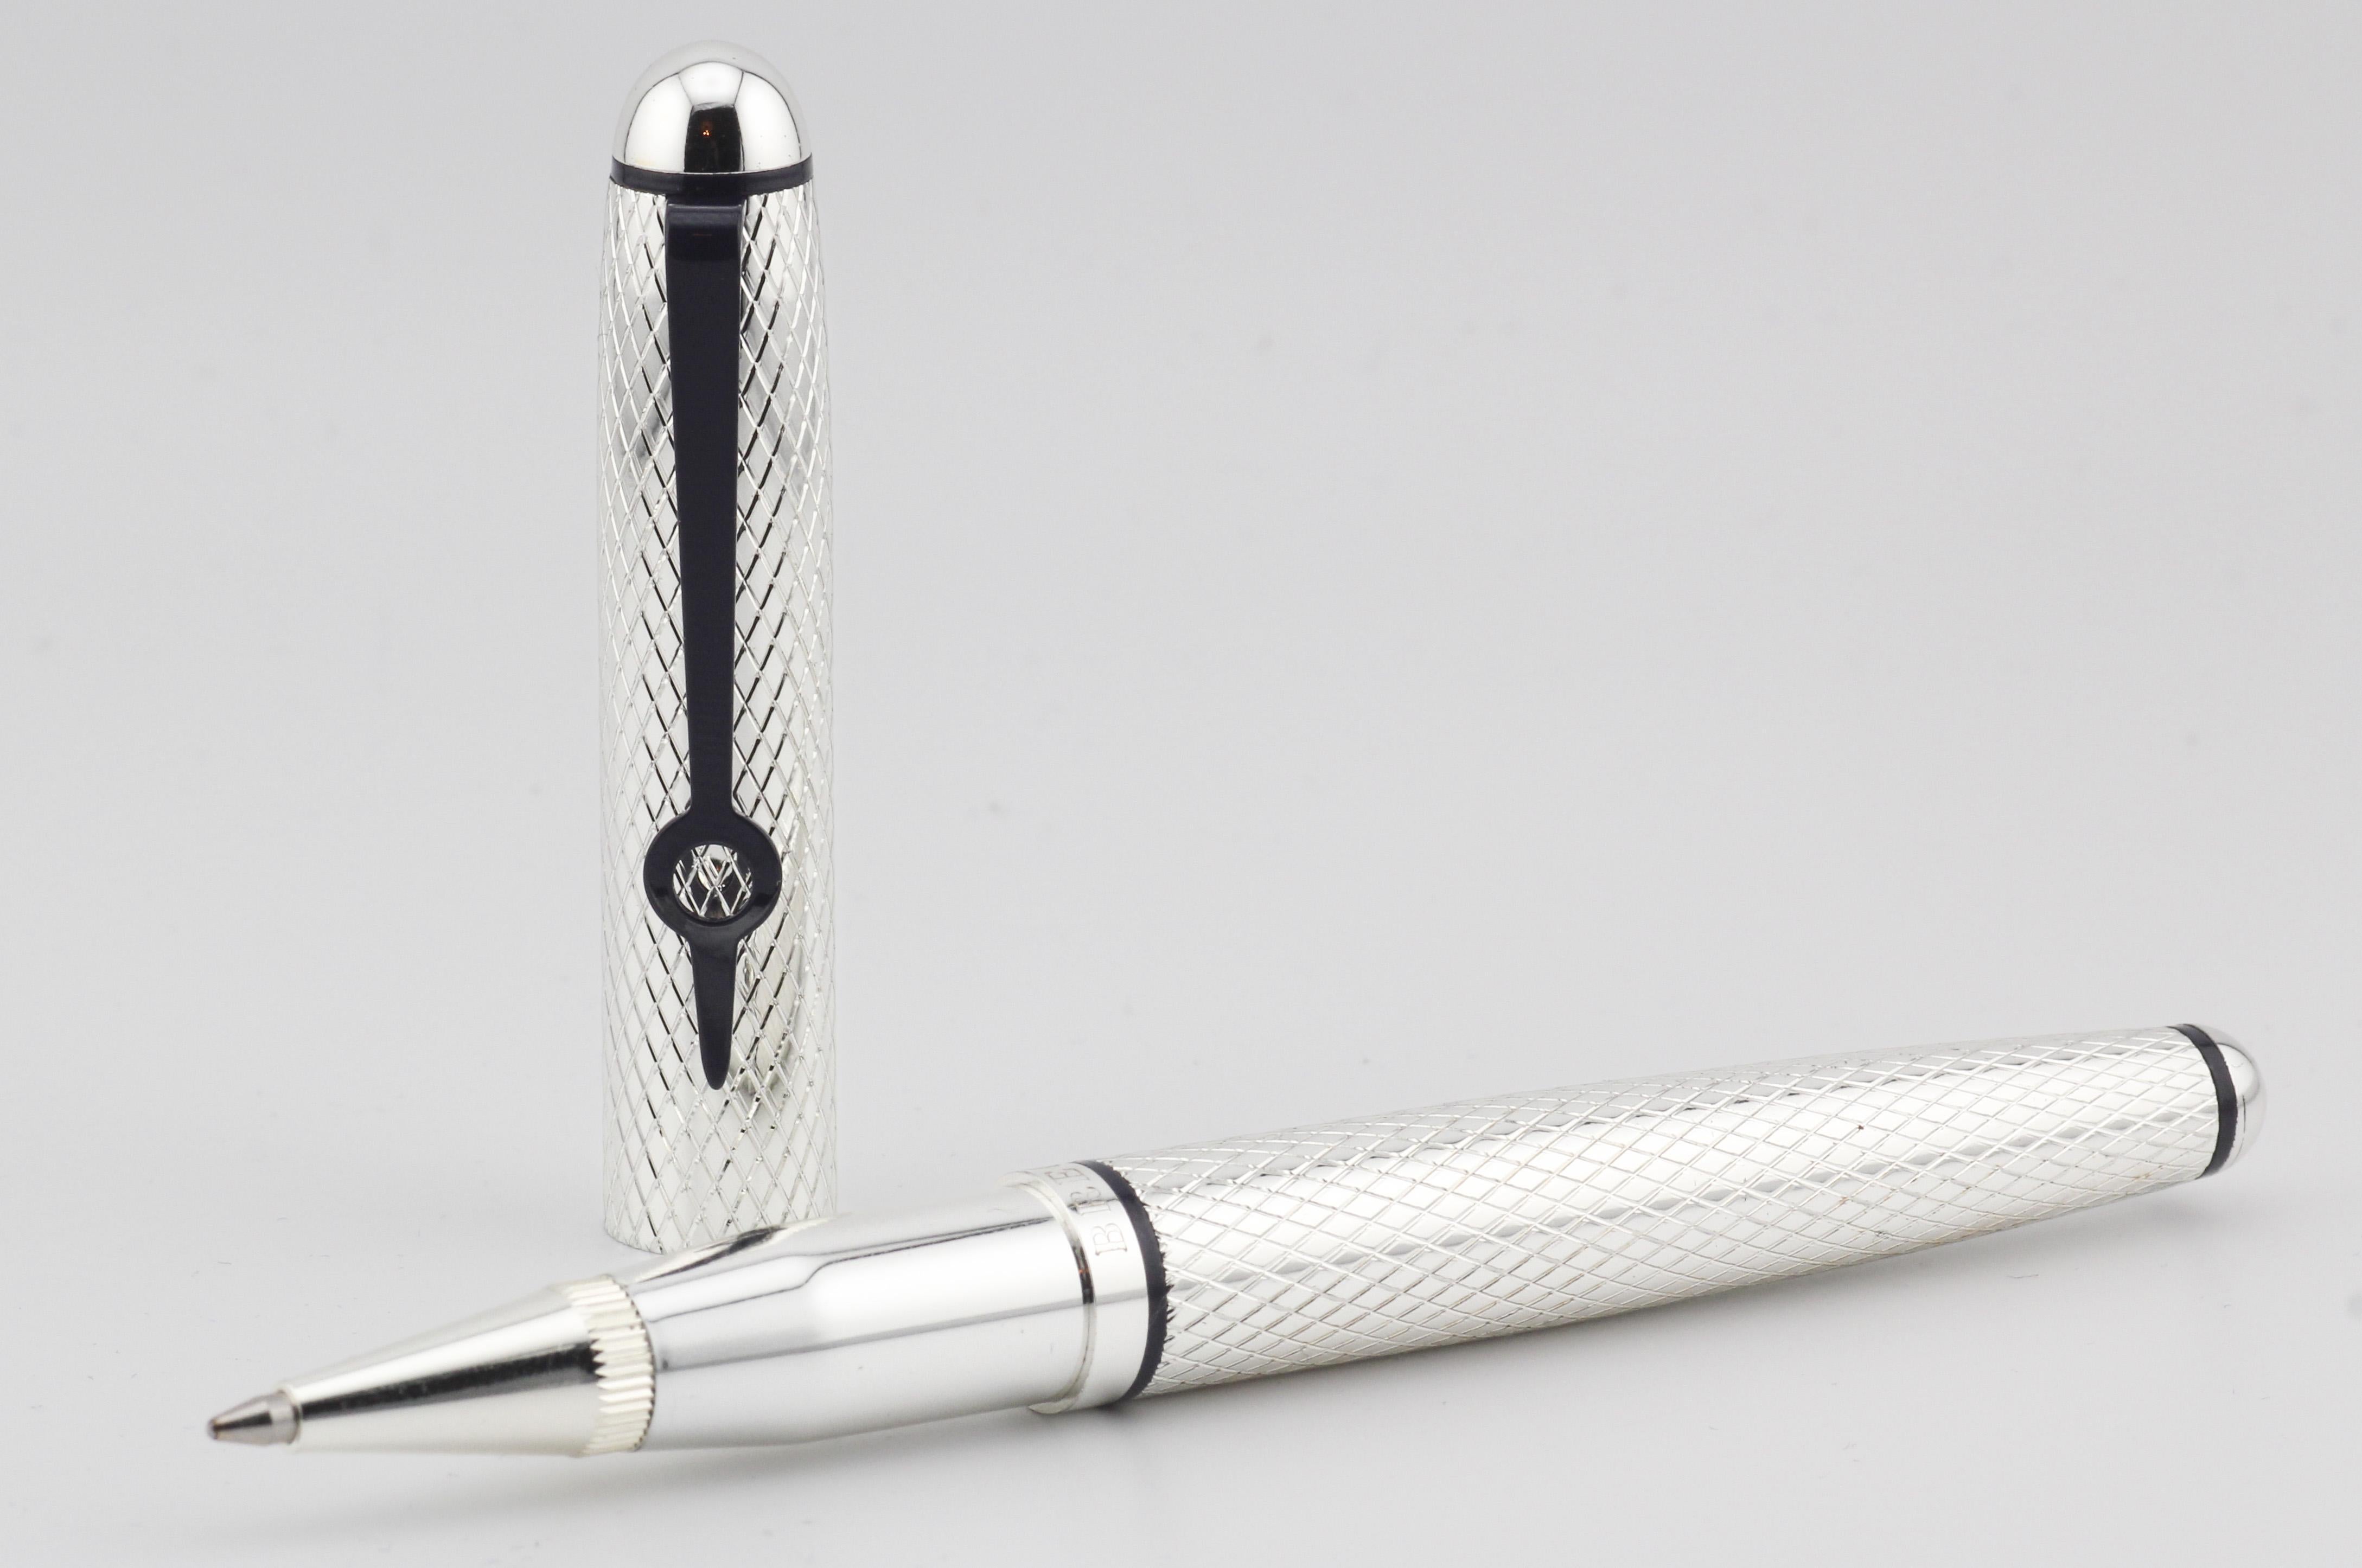 Introducing the Breguet Silver Ballpoint Pen, a symbol of exquisite craftsmanship and refined elegance. Meticulously crafted by the revered Swiss watchmaker, Breguet, this writing instrument epitomizes luxury and sophistication.

Crafted from